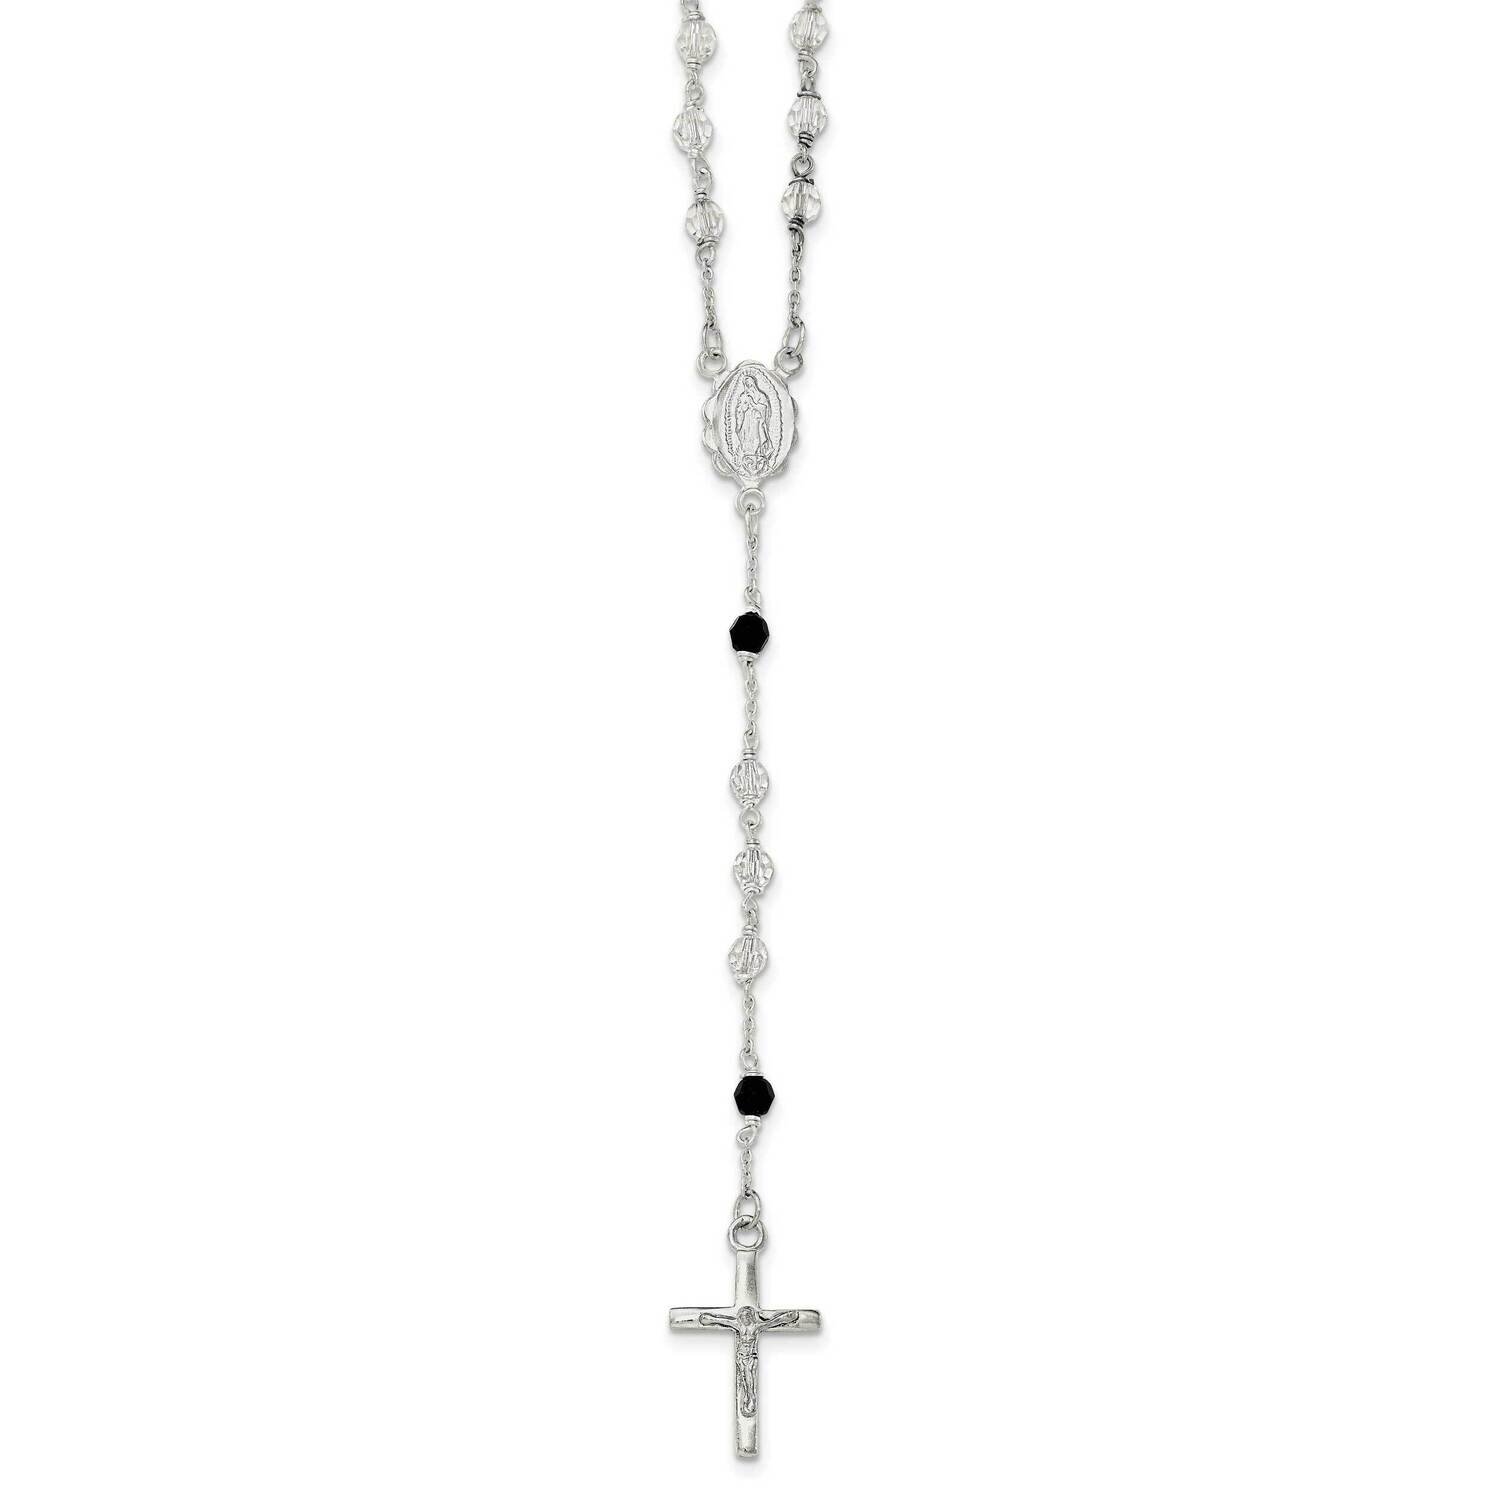 Black Crystal Bead Rosary 23.5 Inch Necklace Sterling Silver Polished QH5134-23.5